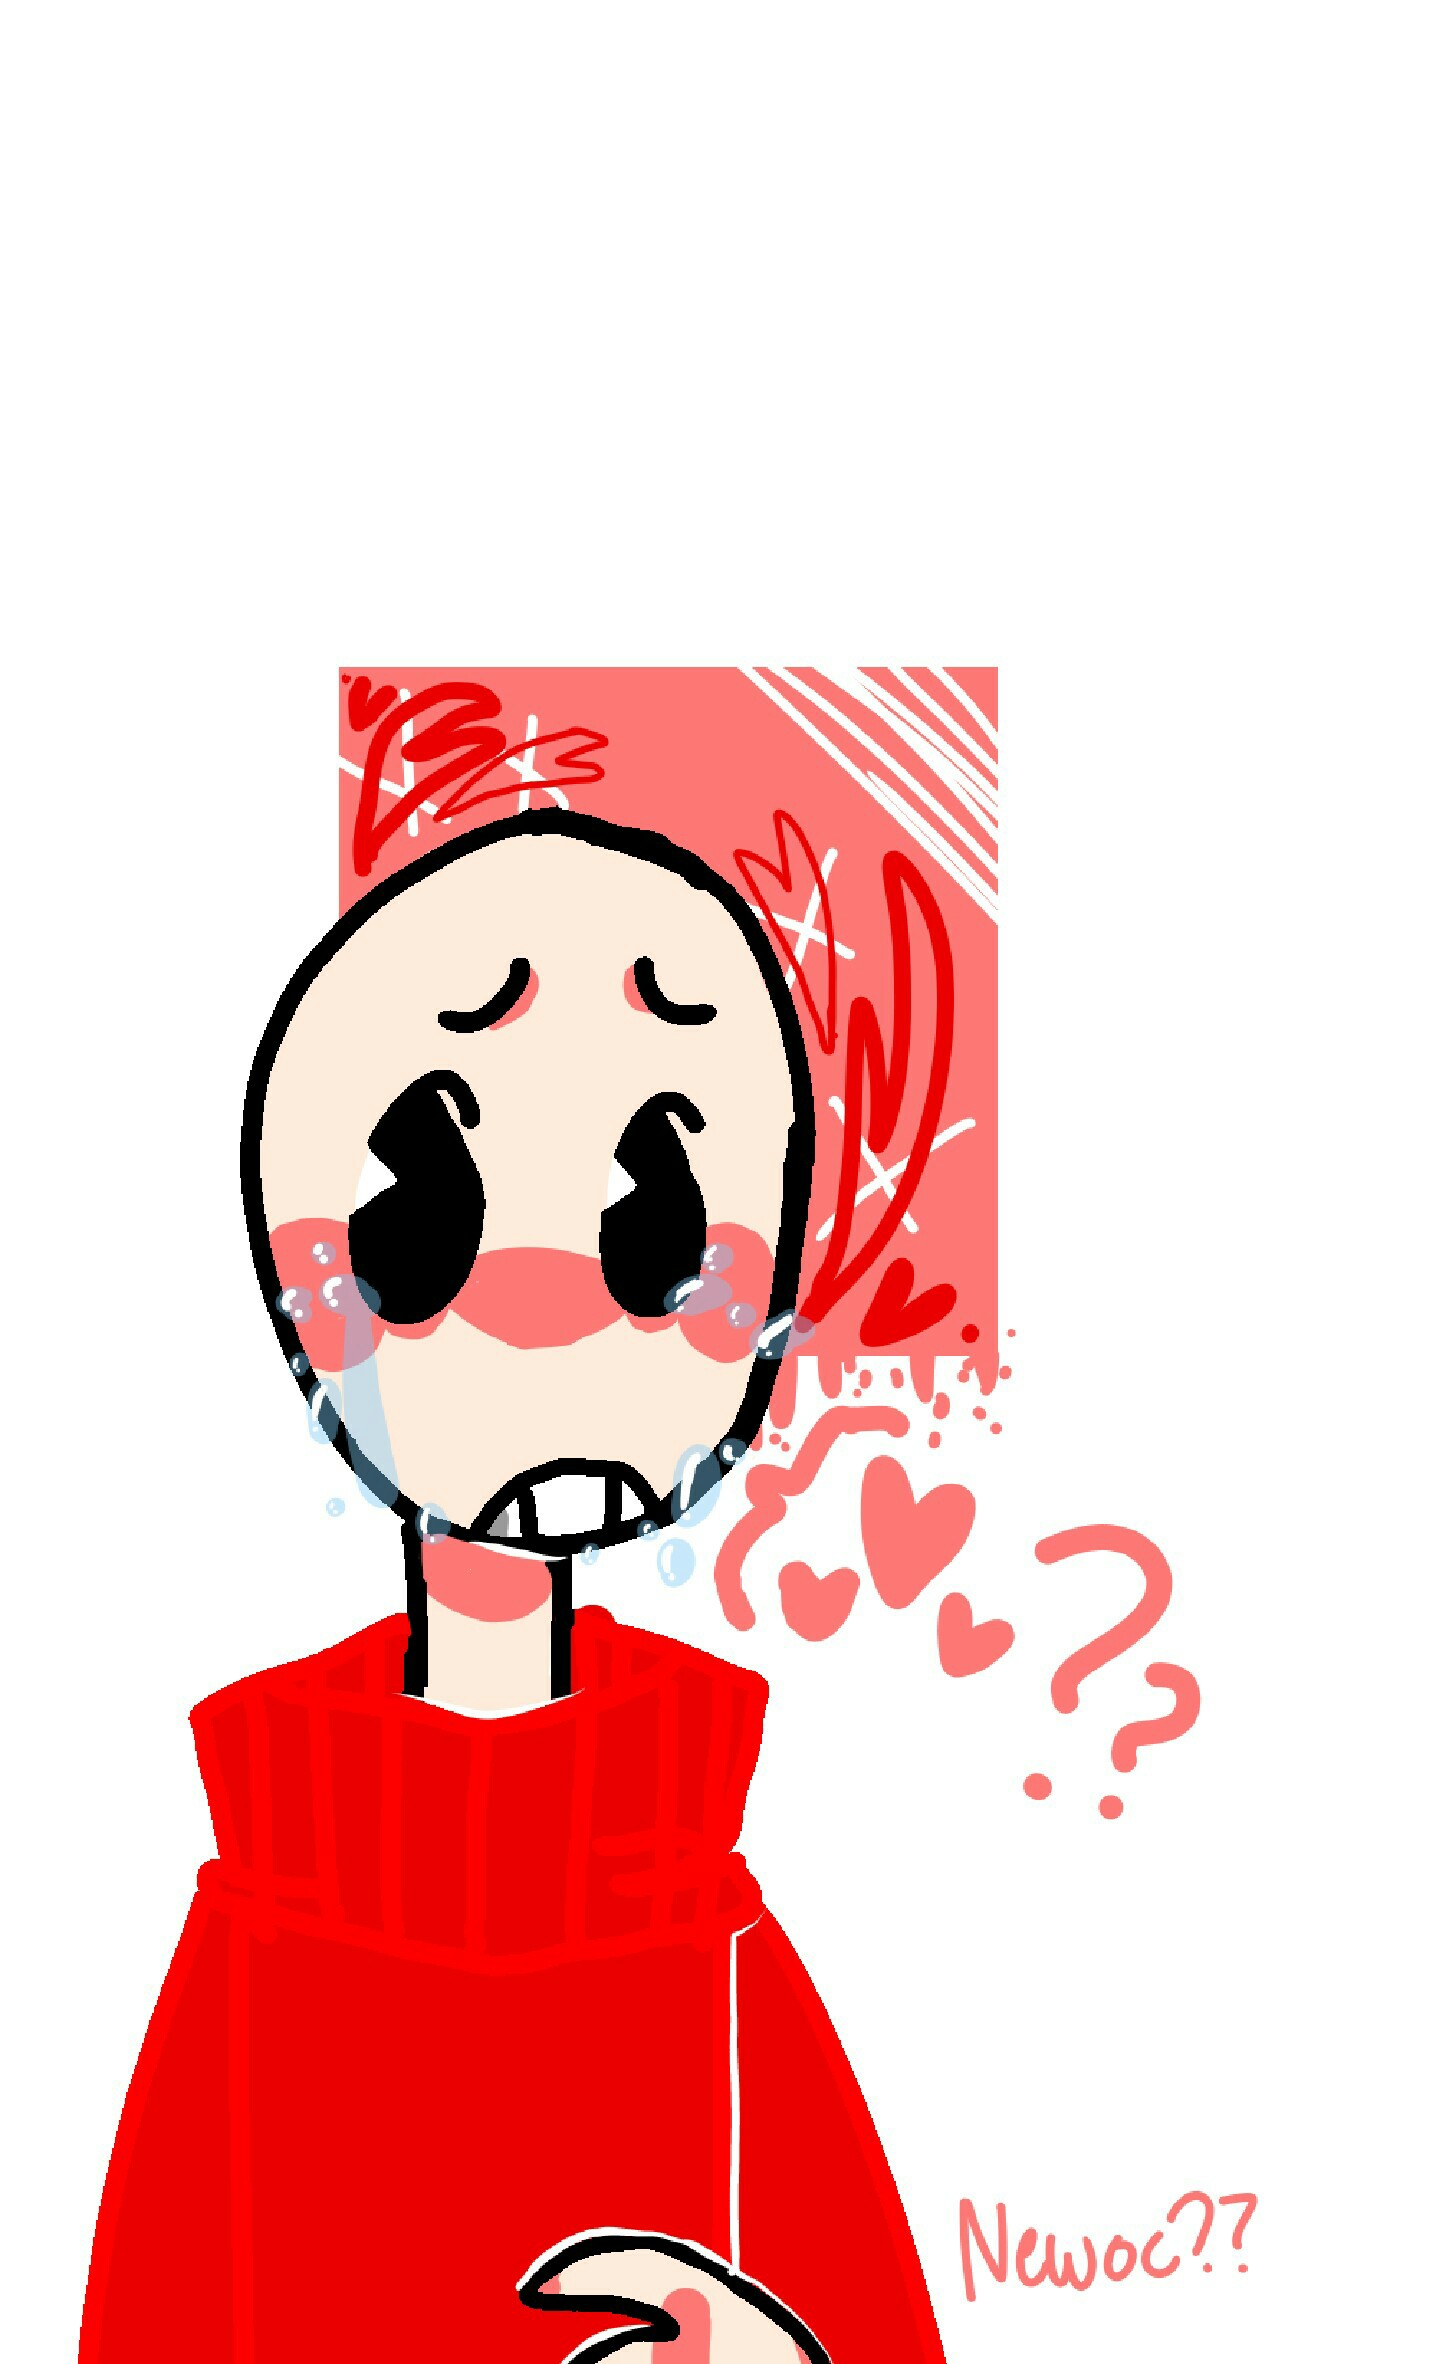 -Heya! it's jack! or goop! and I'm very sorry for not being here alot! cause I feeling abit,,,, uh bored? I don't know,, I just feel- or I just have mixed feelings  I guess?